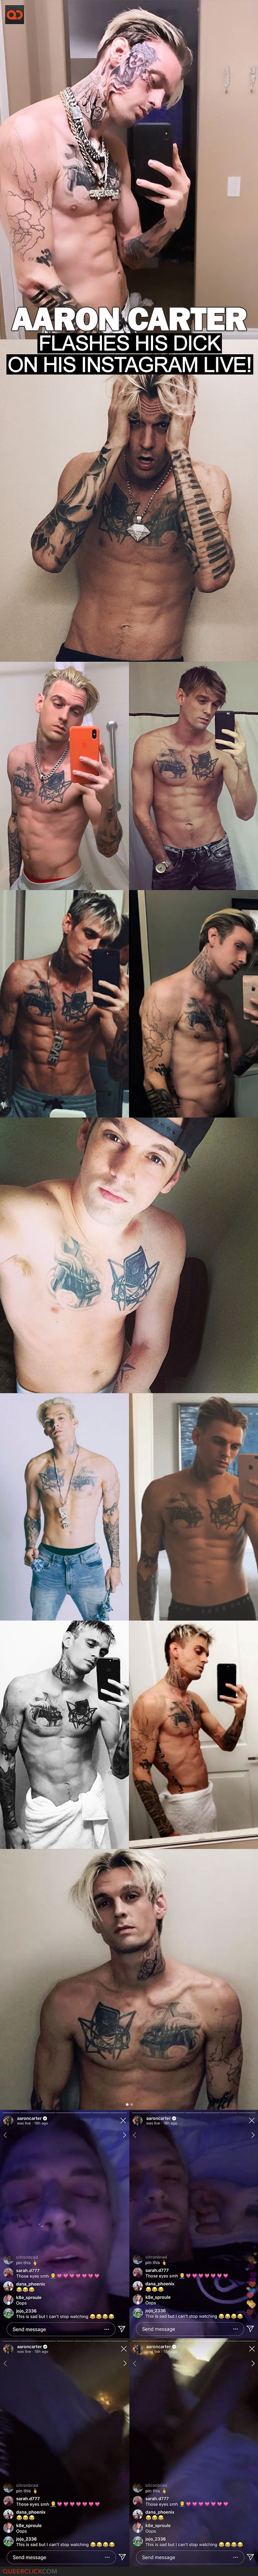 Aaron Carter Flashes His Dick On Instagram Live!